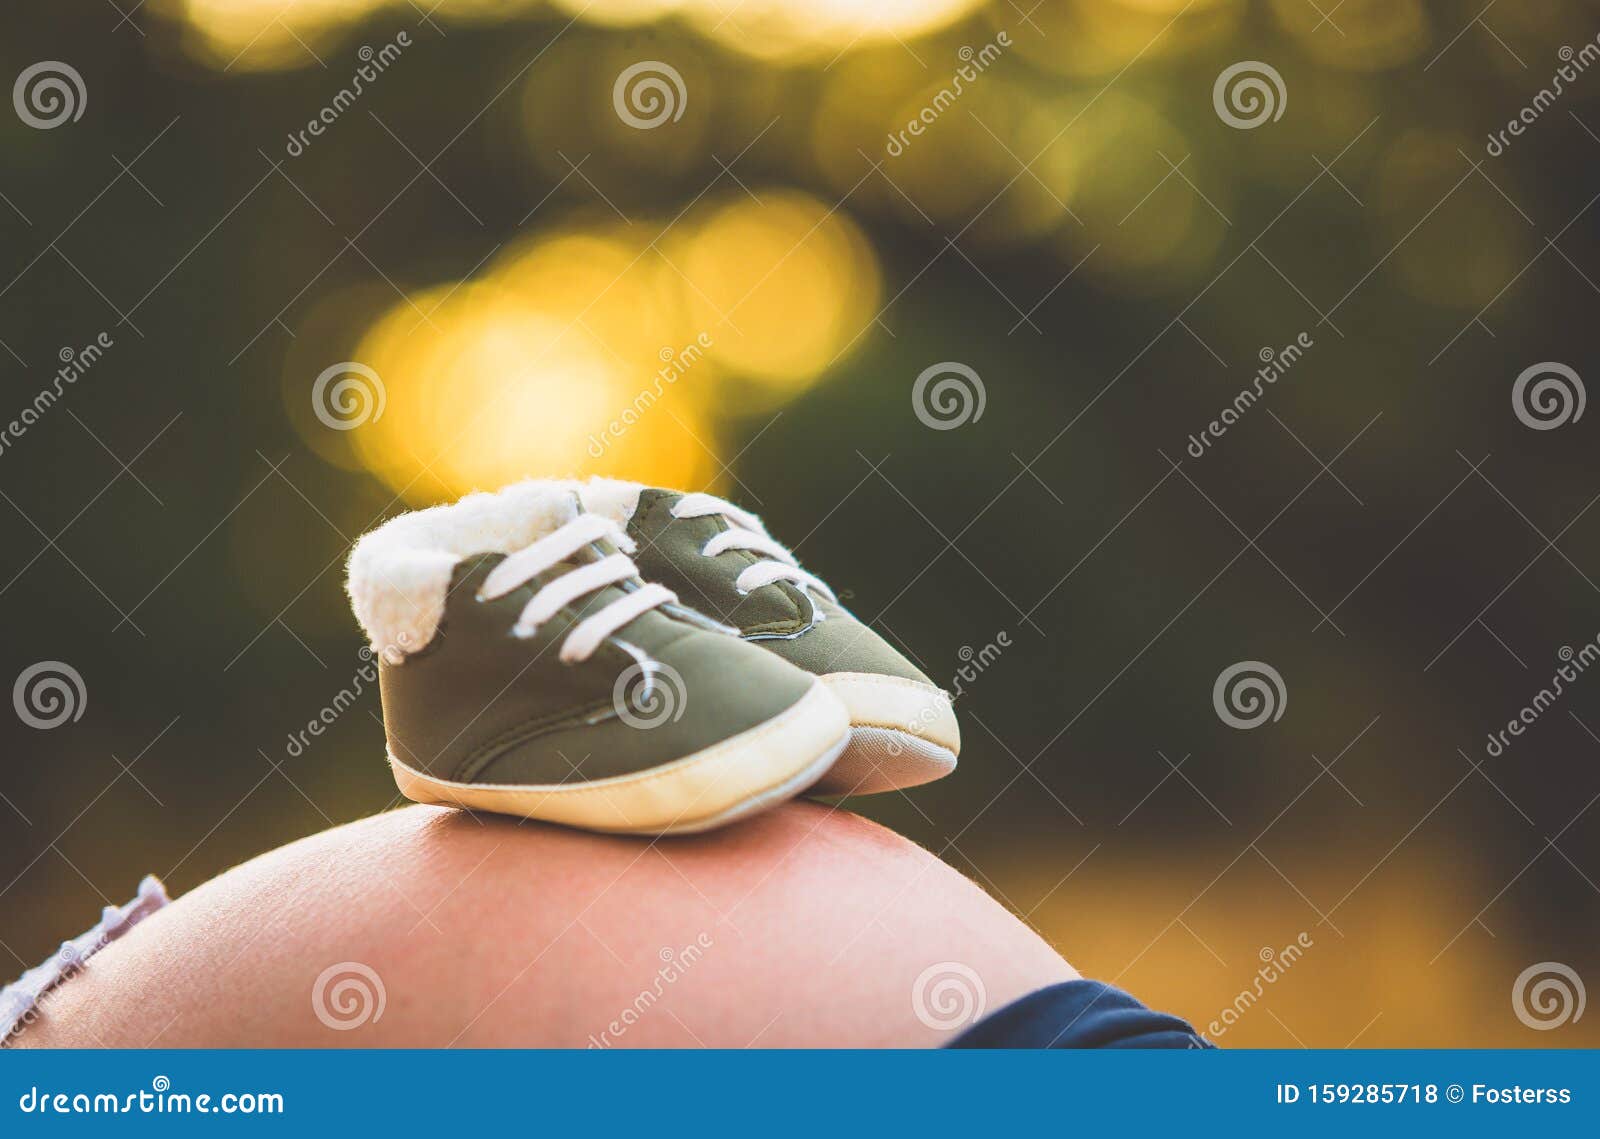 baby shoes on top of a pregnant woman